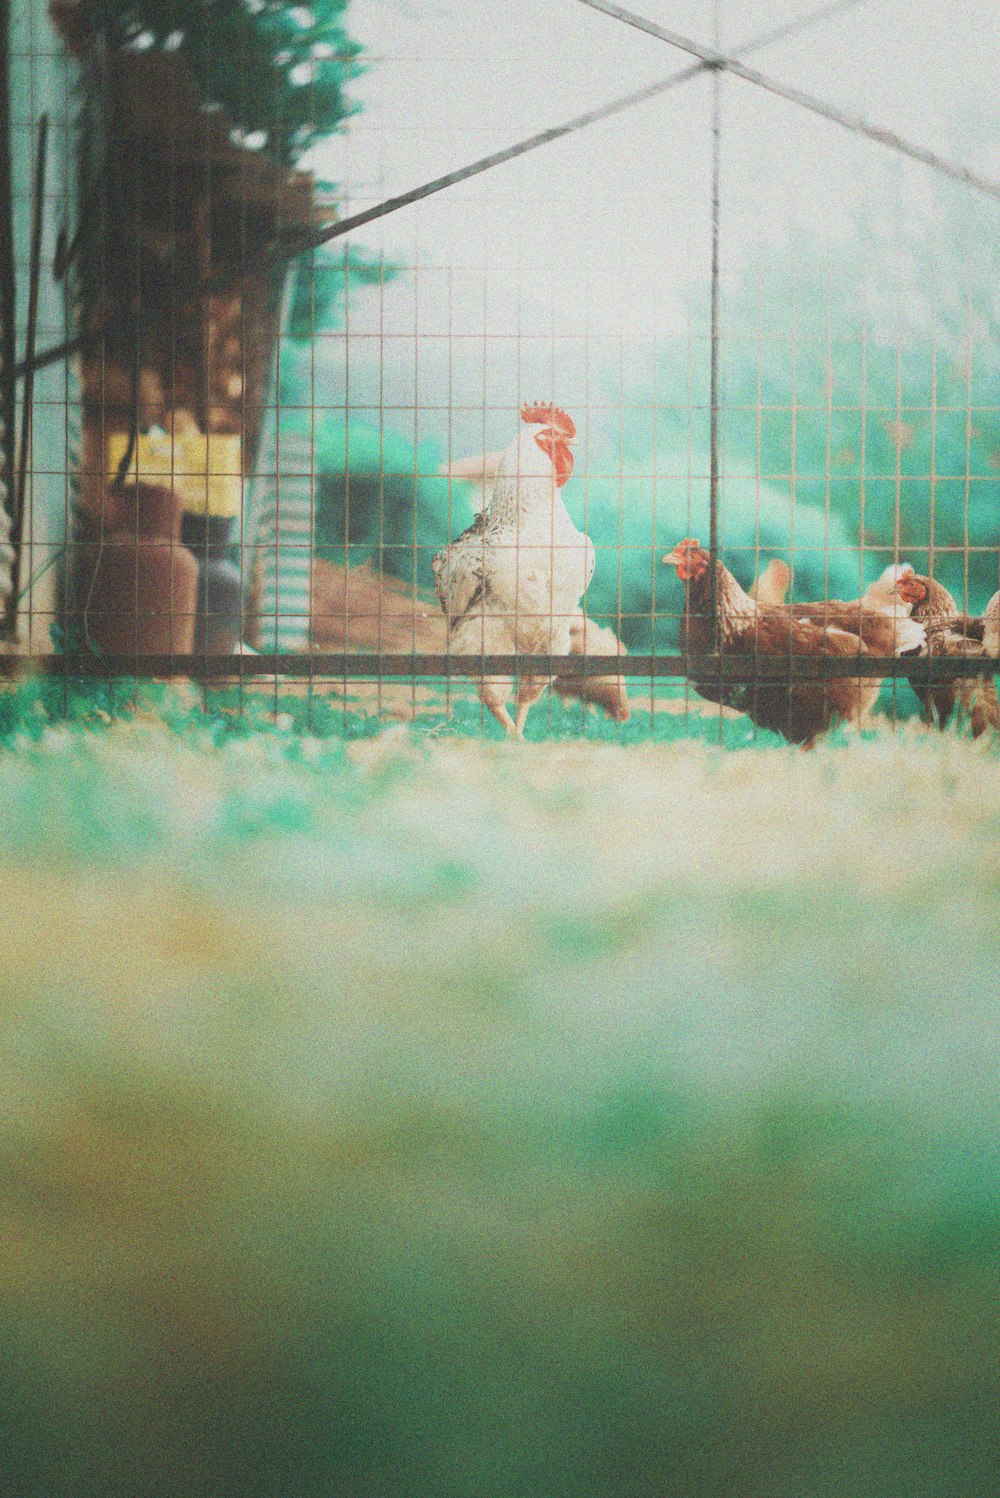 a group of chickens in a cage on the ground